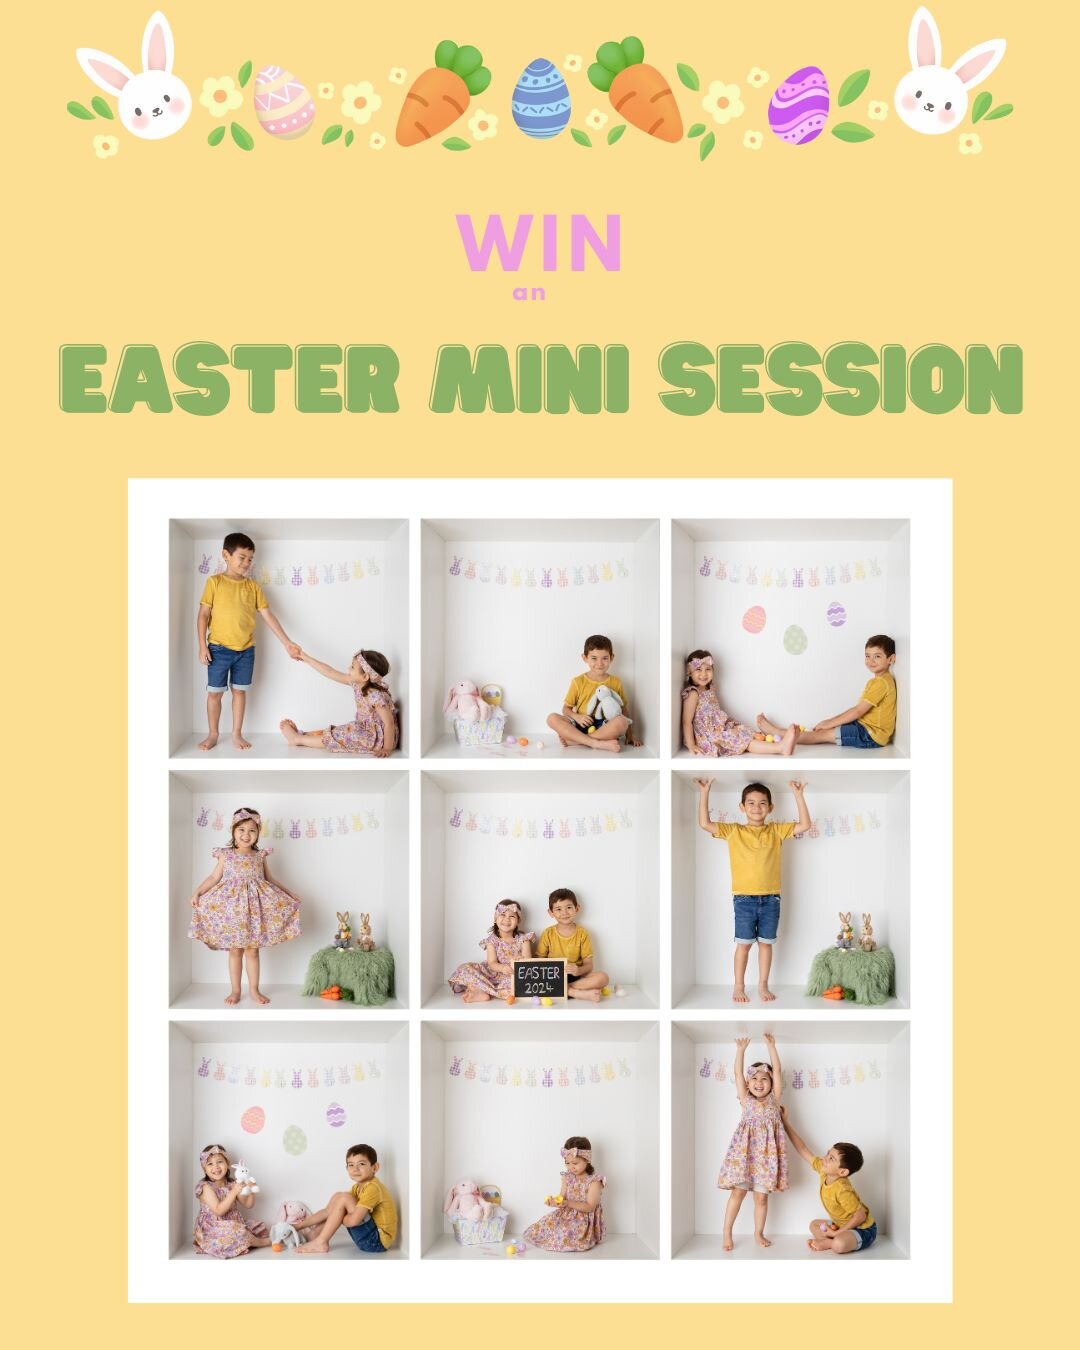 I'll be at the @sundayzmarkets at Rocks Riverside Park tomorrow from 8am - 1pm.
Make sure you enter to WIN an Easter Mini Session with me! 🐰

Lots on for everyone including a visit from the Easter Bunny himself so come &amp; check it out!
🌭 Food Tr